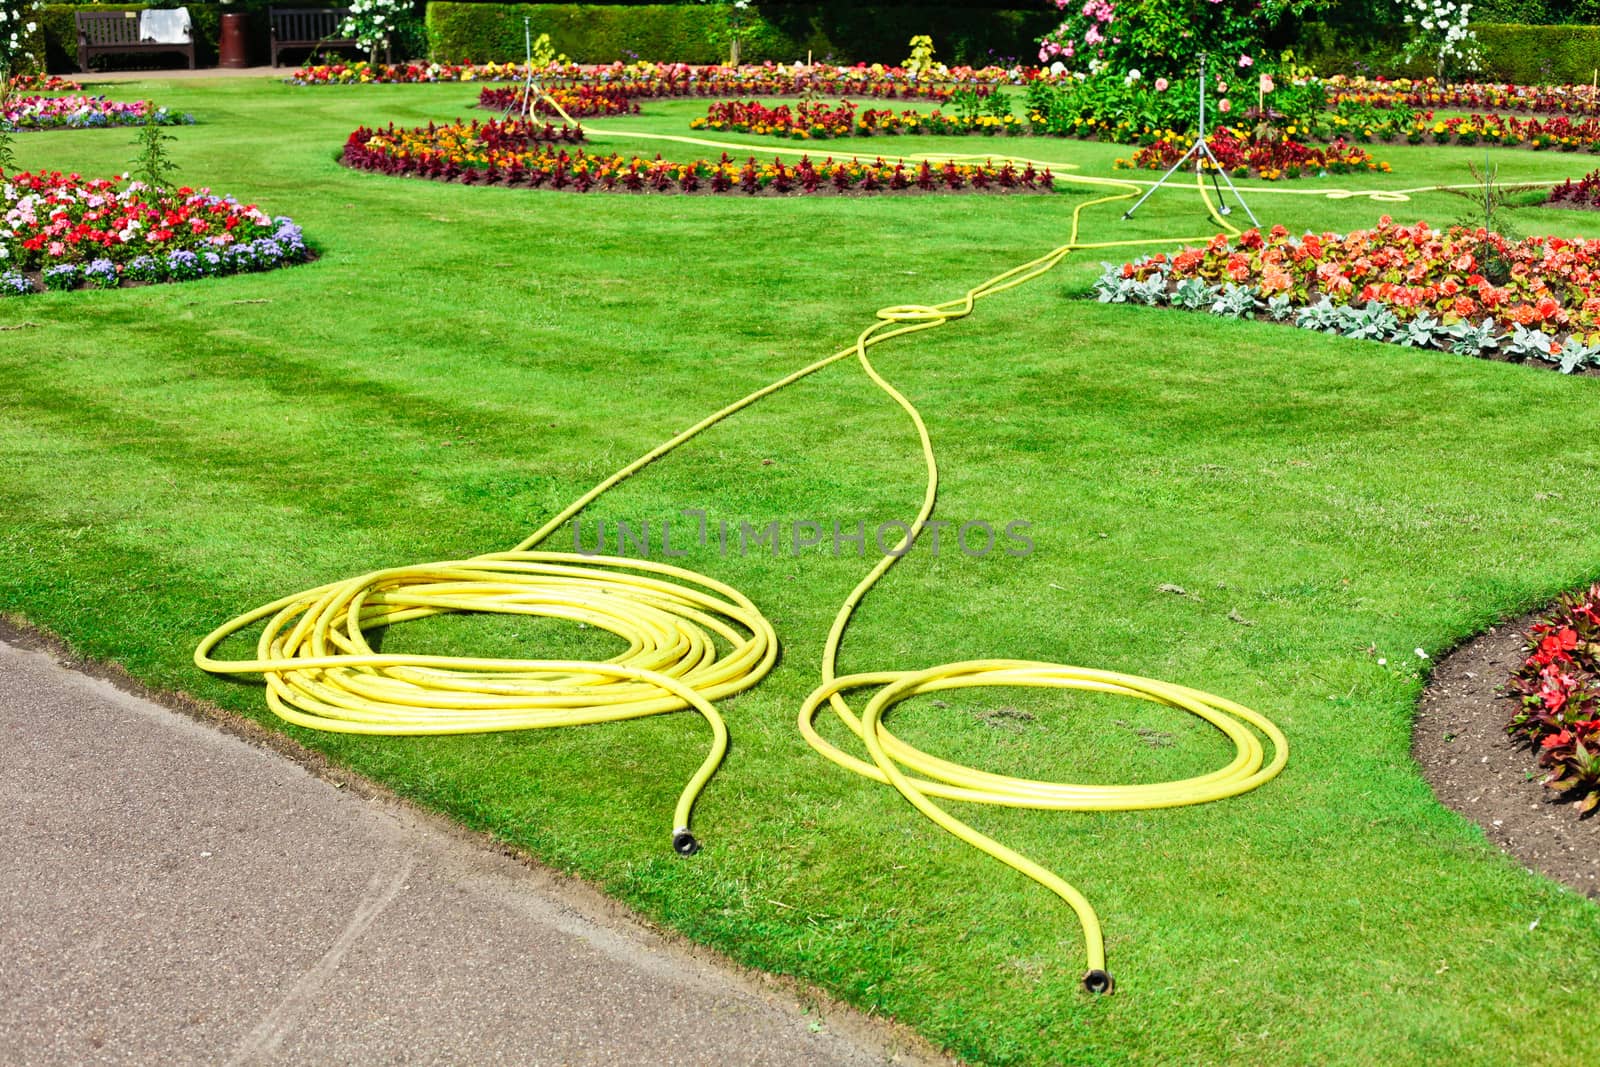 Two yellow hosepipes in a landscaped garden